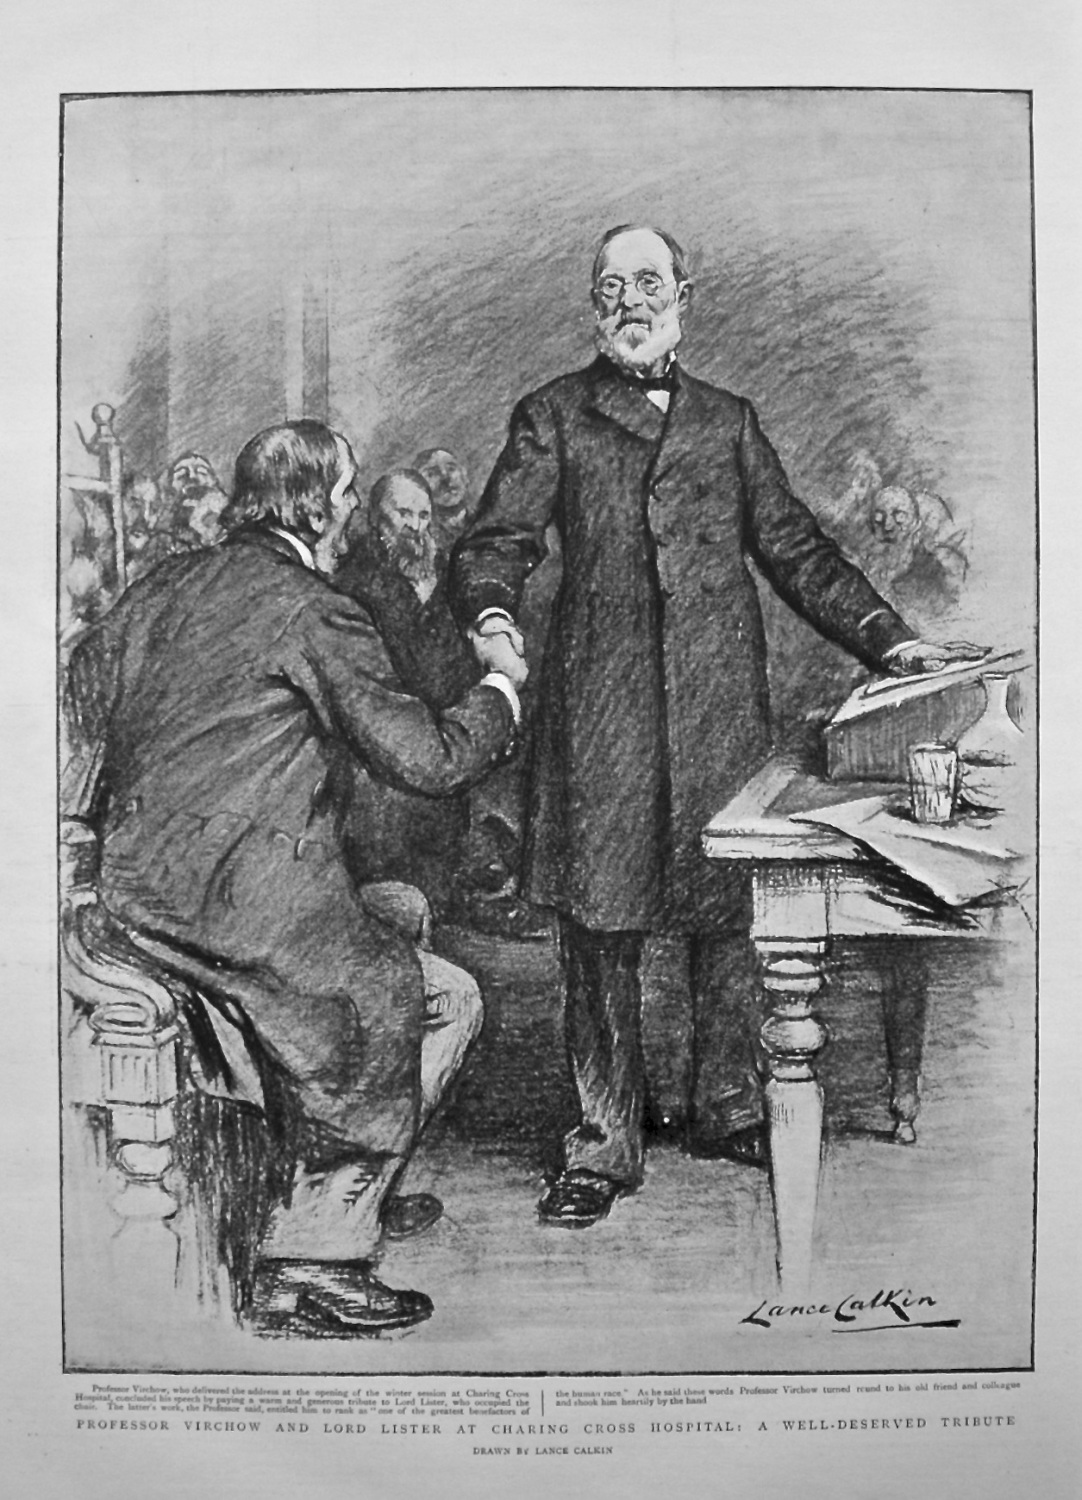 Professor Virchow and Lord Lister at Charing Cross Hospital : A Well-Deserv